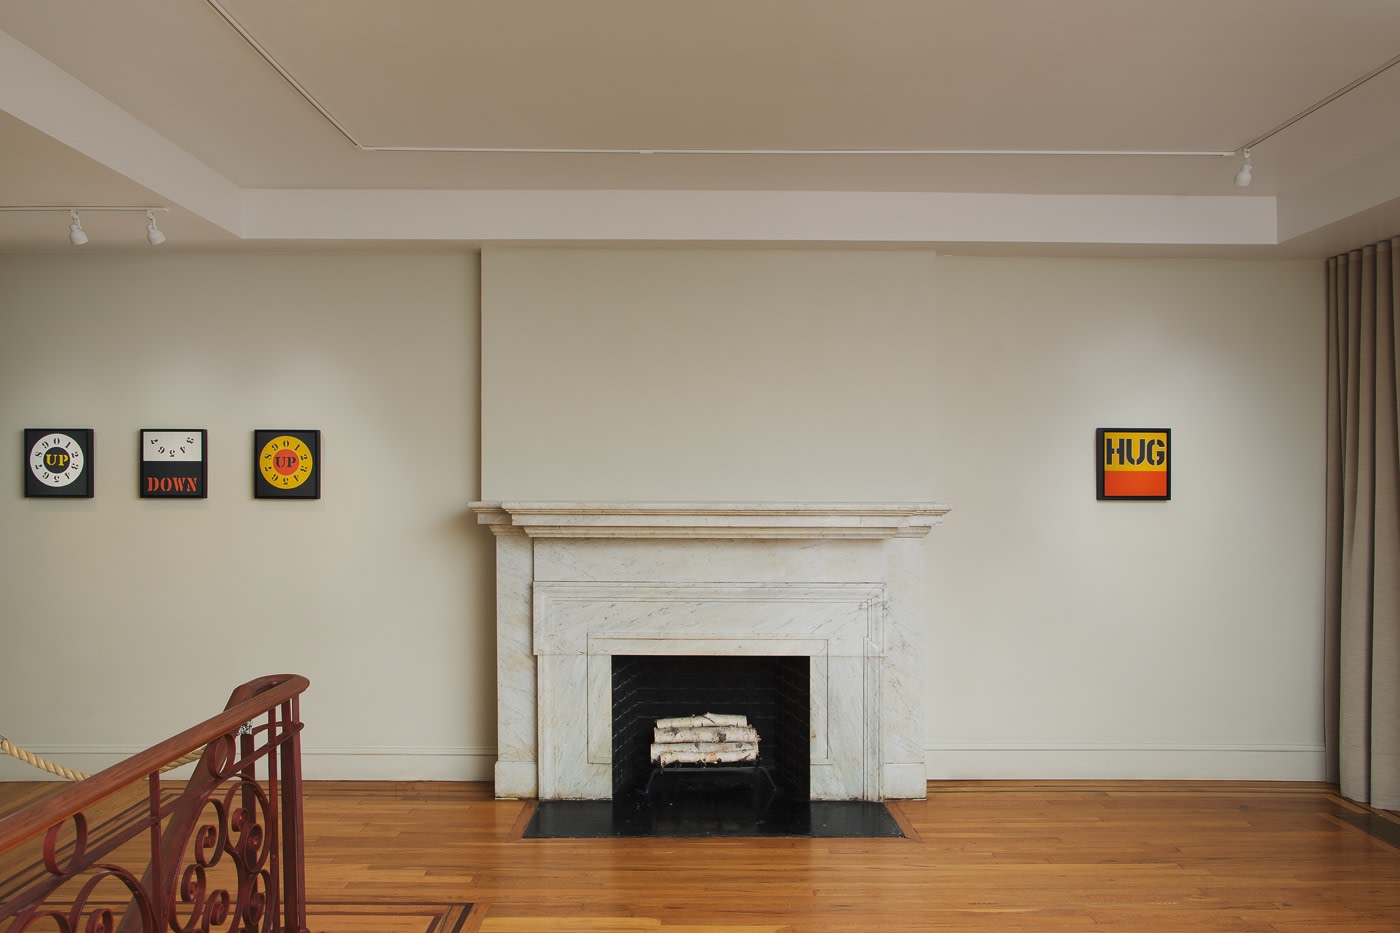 Installation view of Robert Indiana: Sign Paintings, 1960-65 at Craig F. Starr Gallery